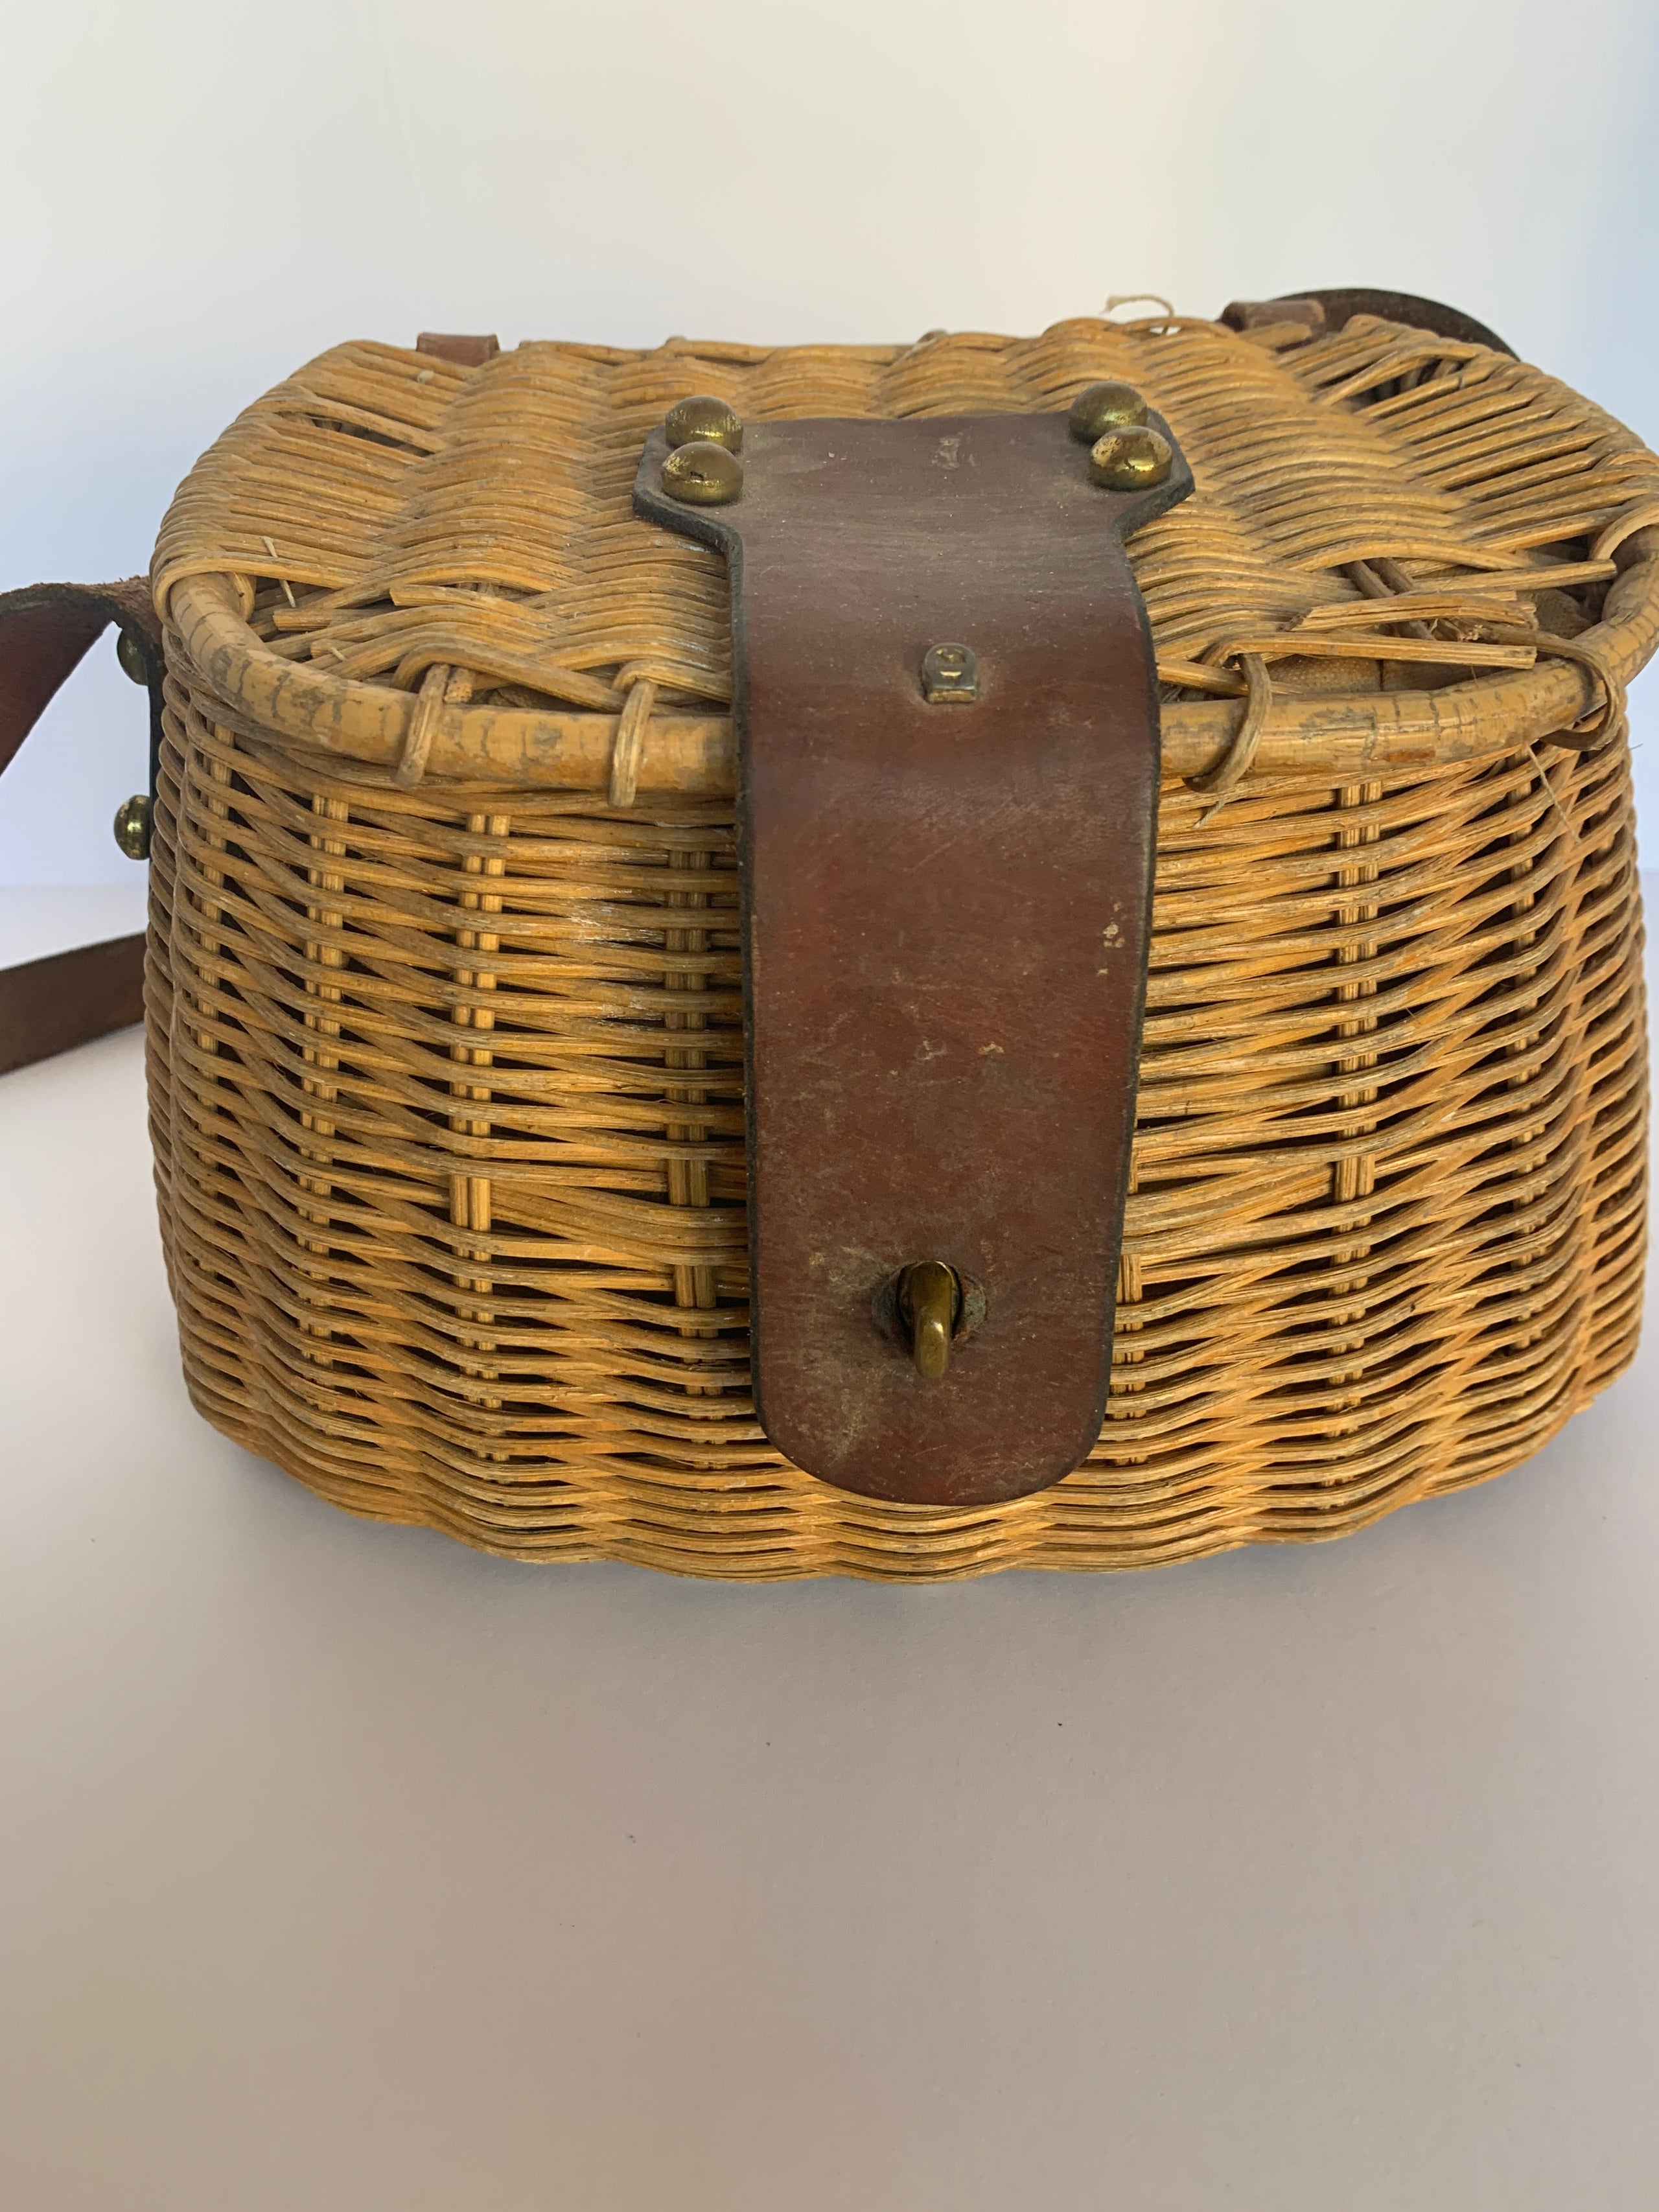 Antique Fishing Creel Basket Wicker and Leather Vintage - antiques